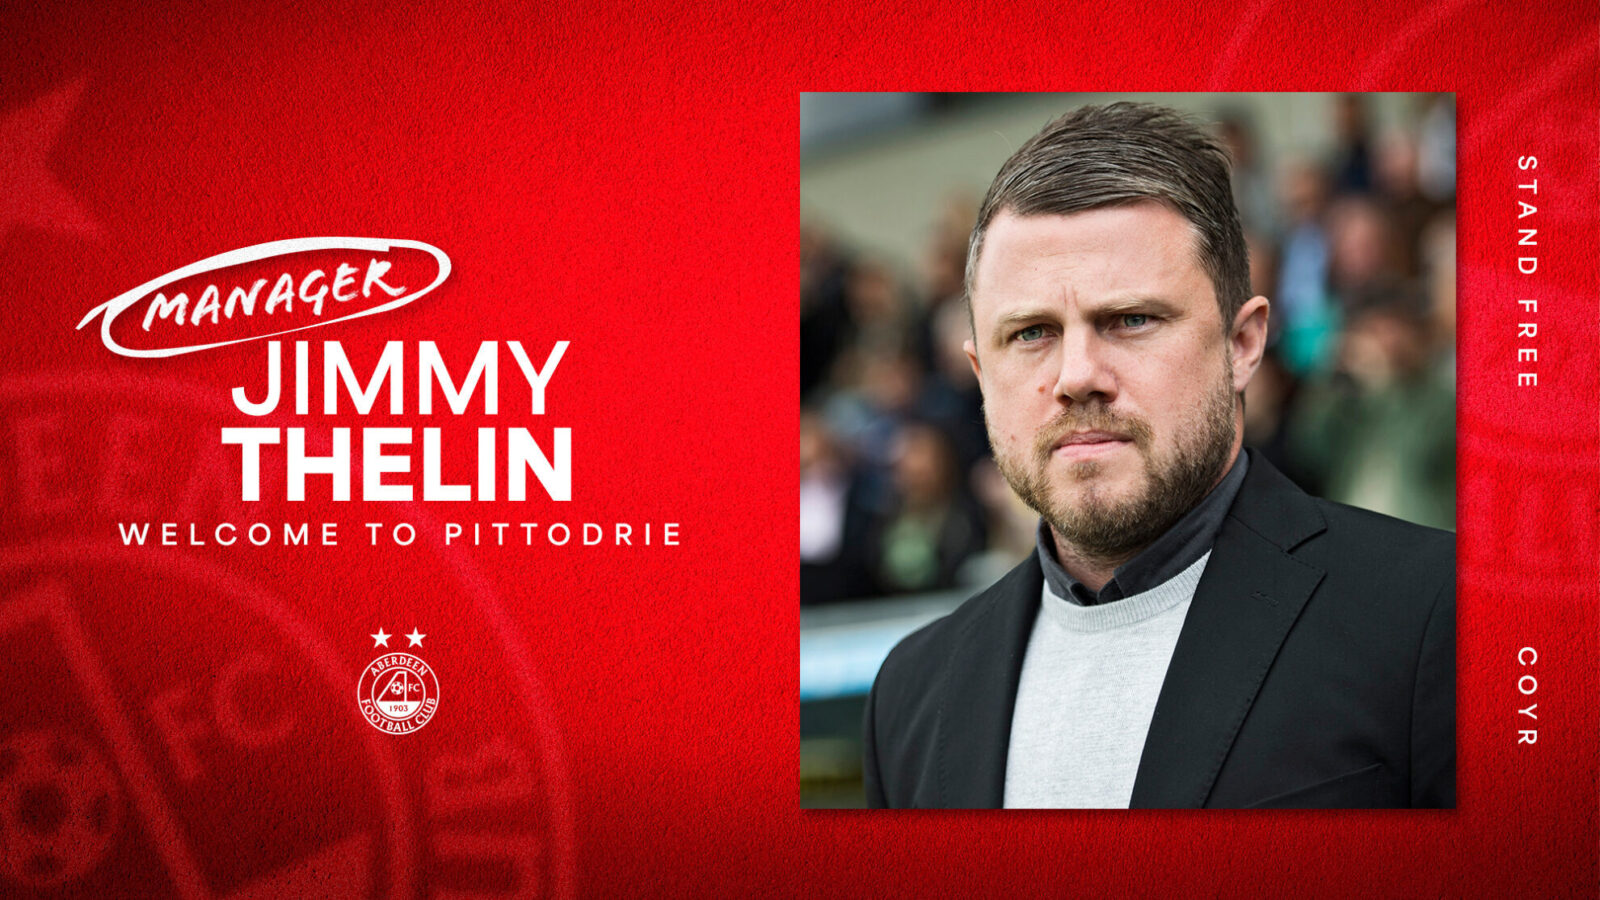 Aberdeen FC appoint Jimmy Thelin as manager